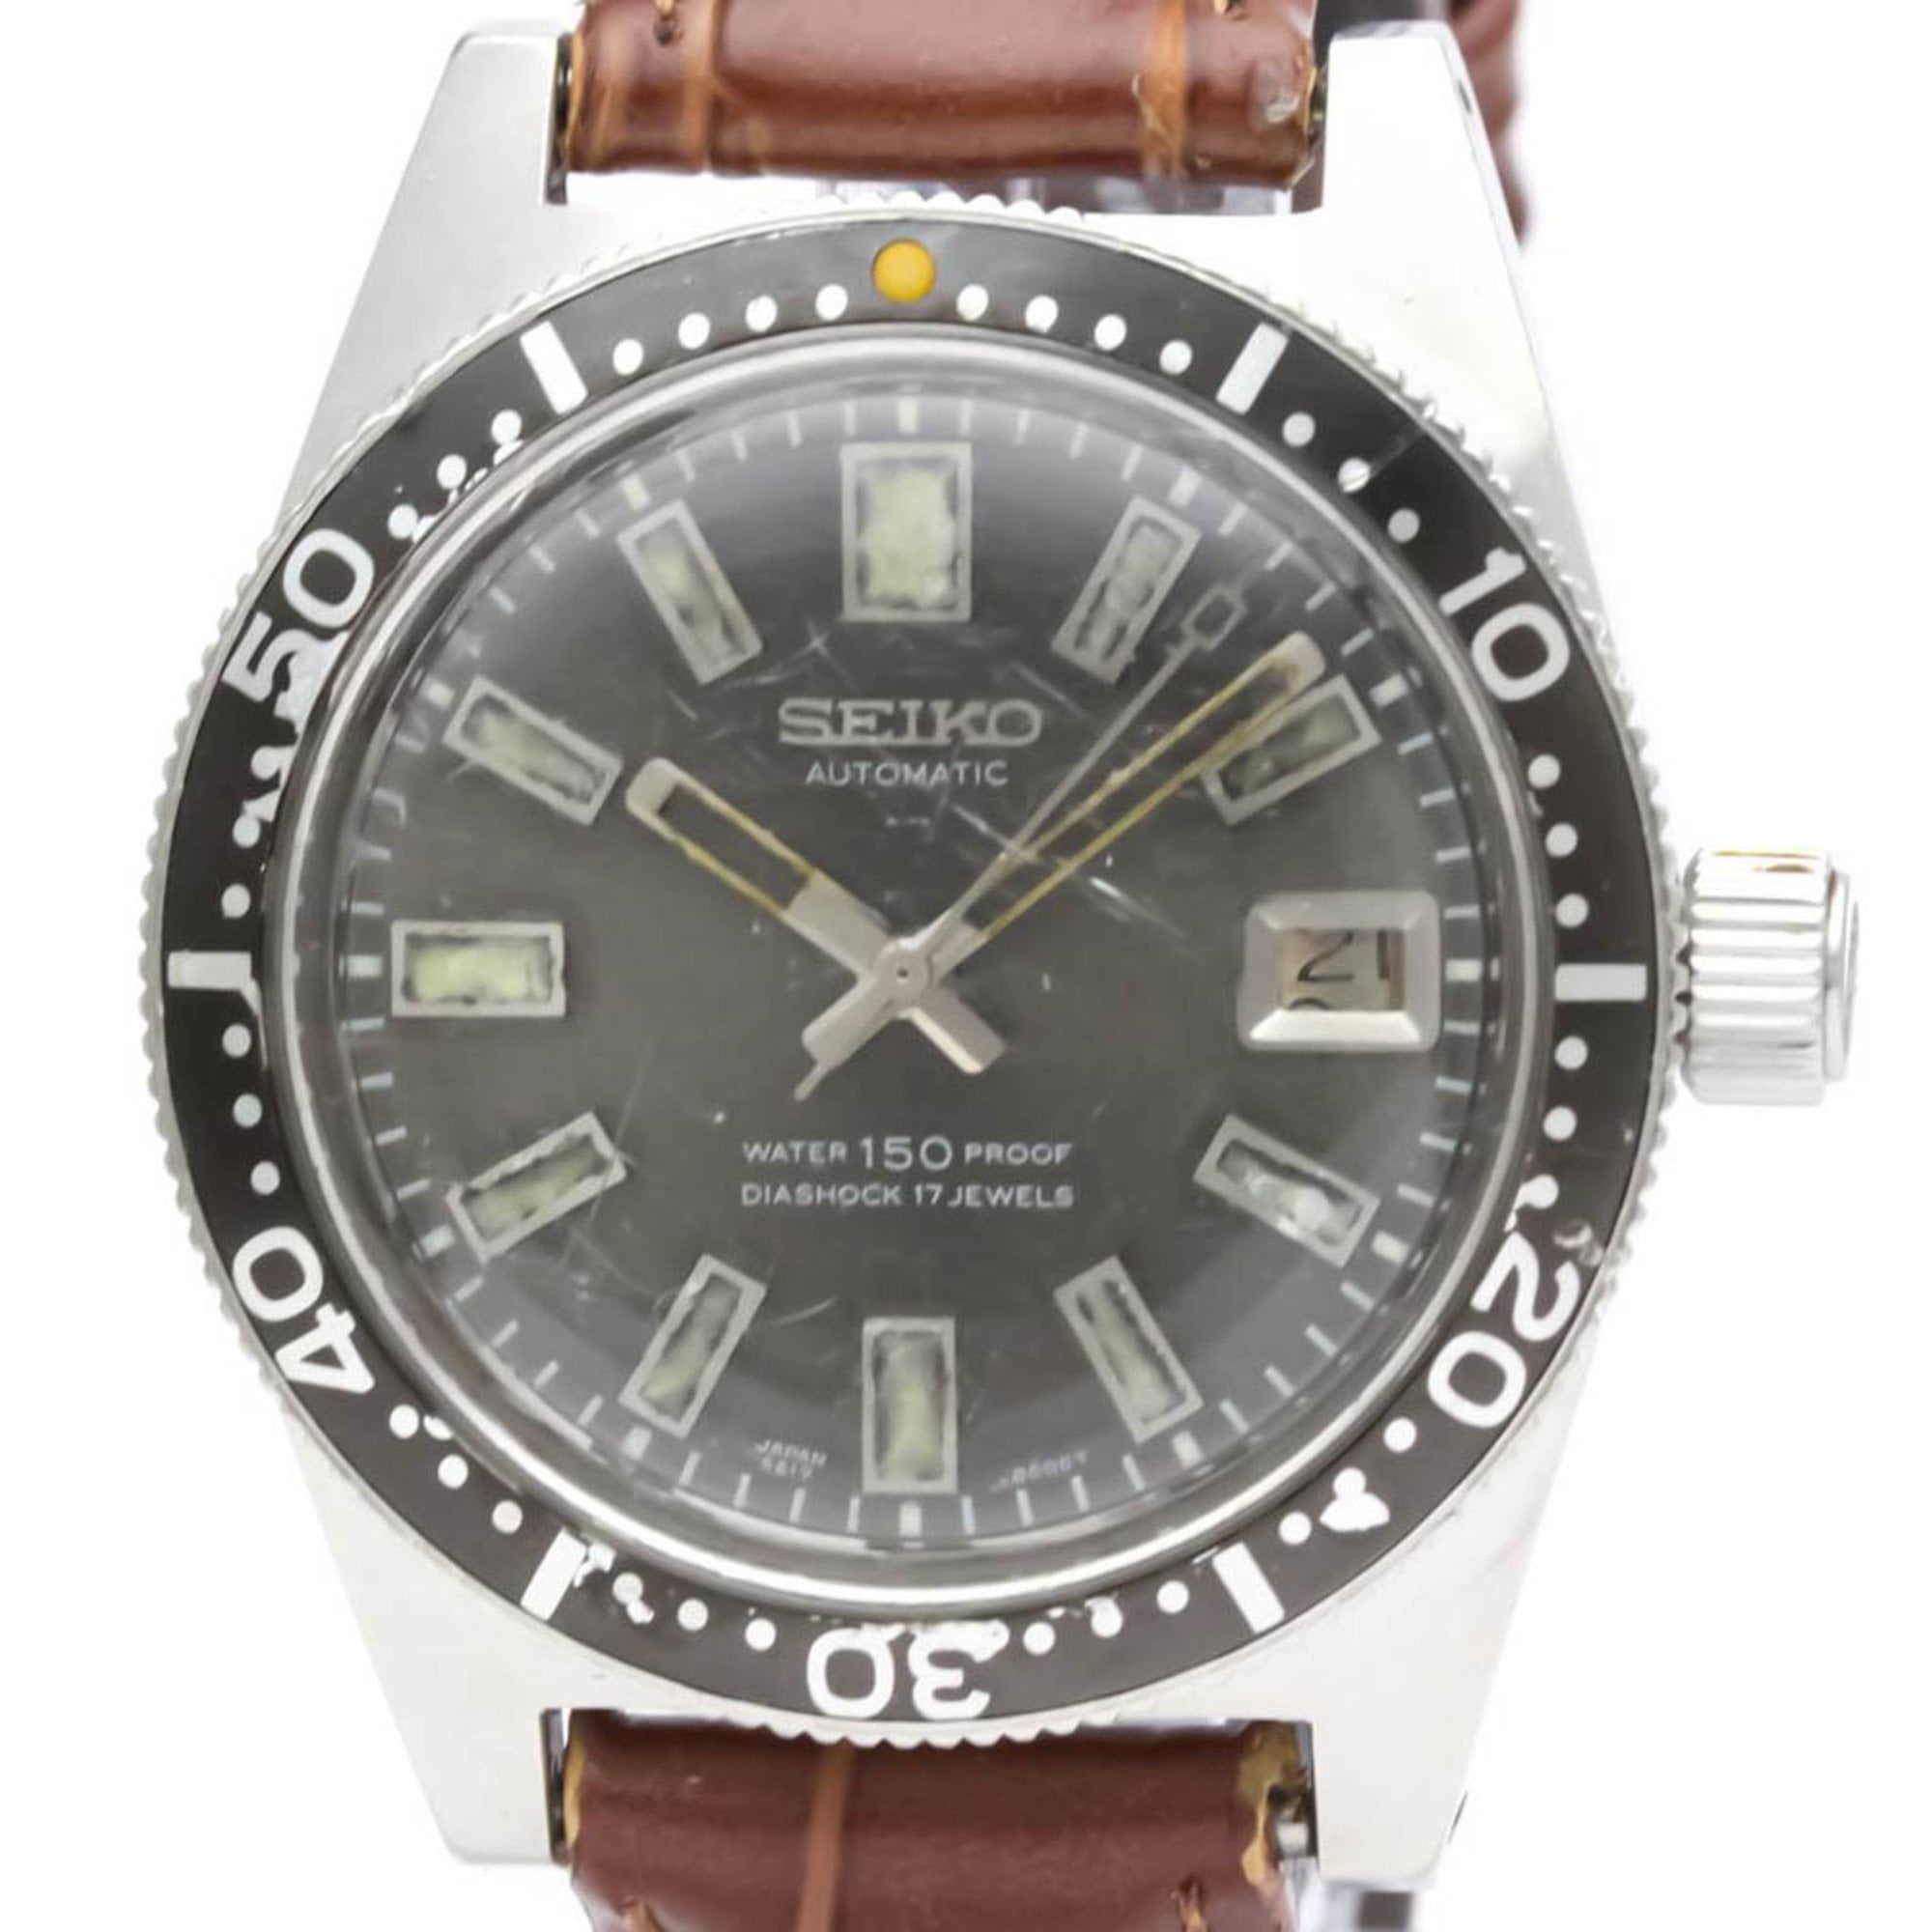 Authenticated Used Vintage SEIKO Diver 150M First Model Steel Mens Watch  6217-8001 BF546266 